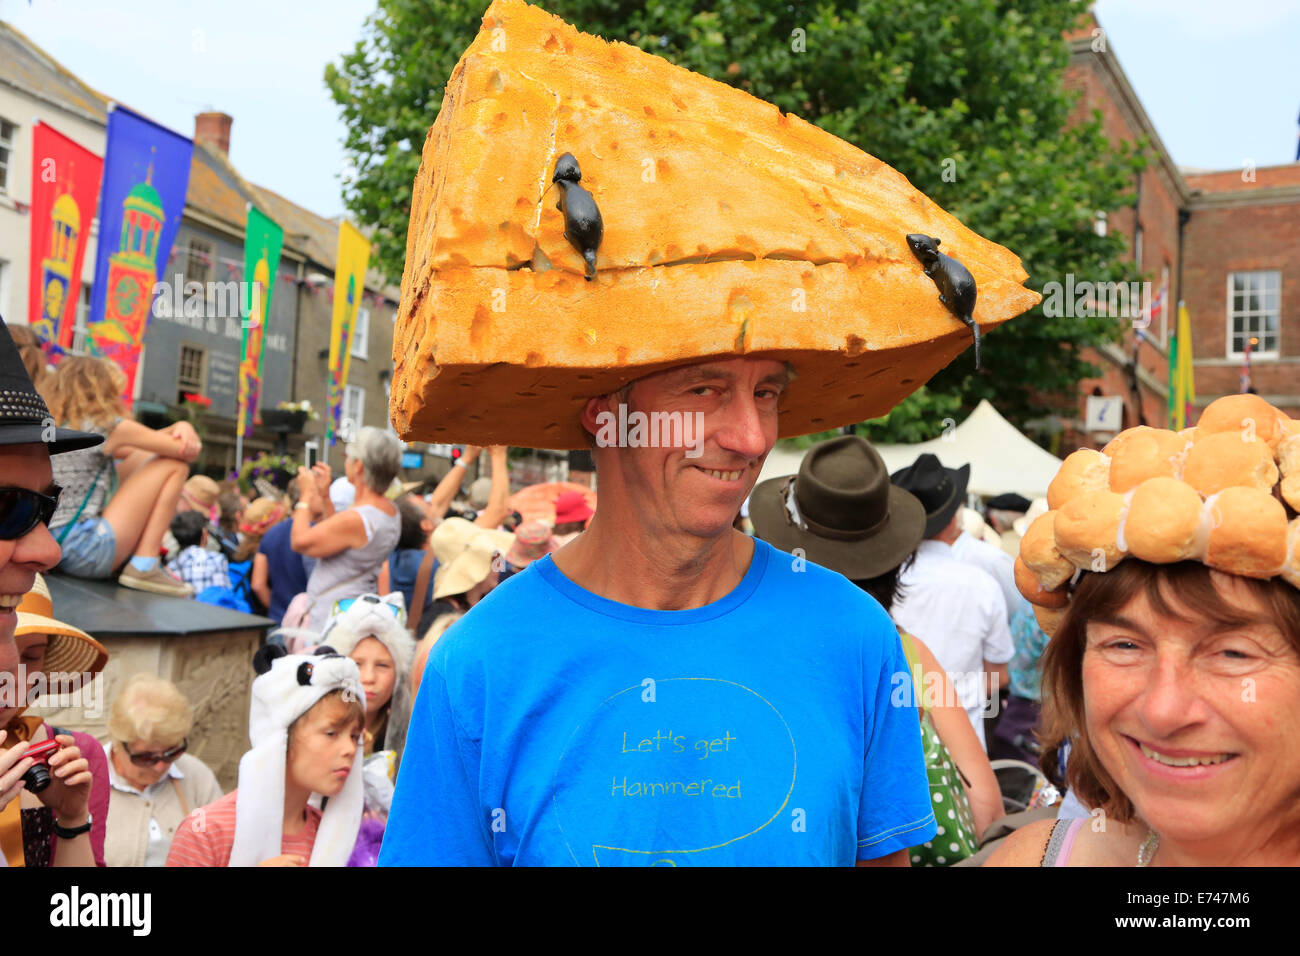 Bridport, Dorset, UK. 6th September 2014. Hat wearers gather and promenade in Bridport. The annual Bridport Hat Festival encourages residents and visitors to take part in hat related activities and and competitions including best hats, best hatted dog, and most elegantly-hatted couple. Credit:  Tom Corban/Alamy Live News Stock Photo